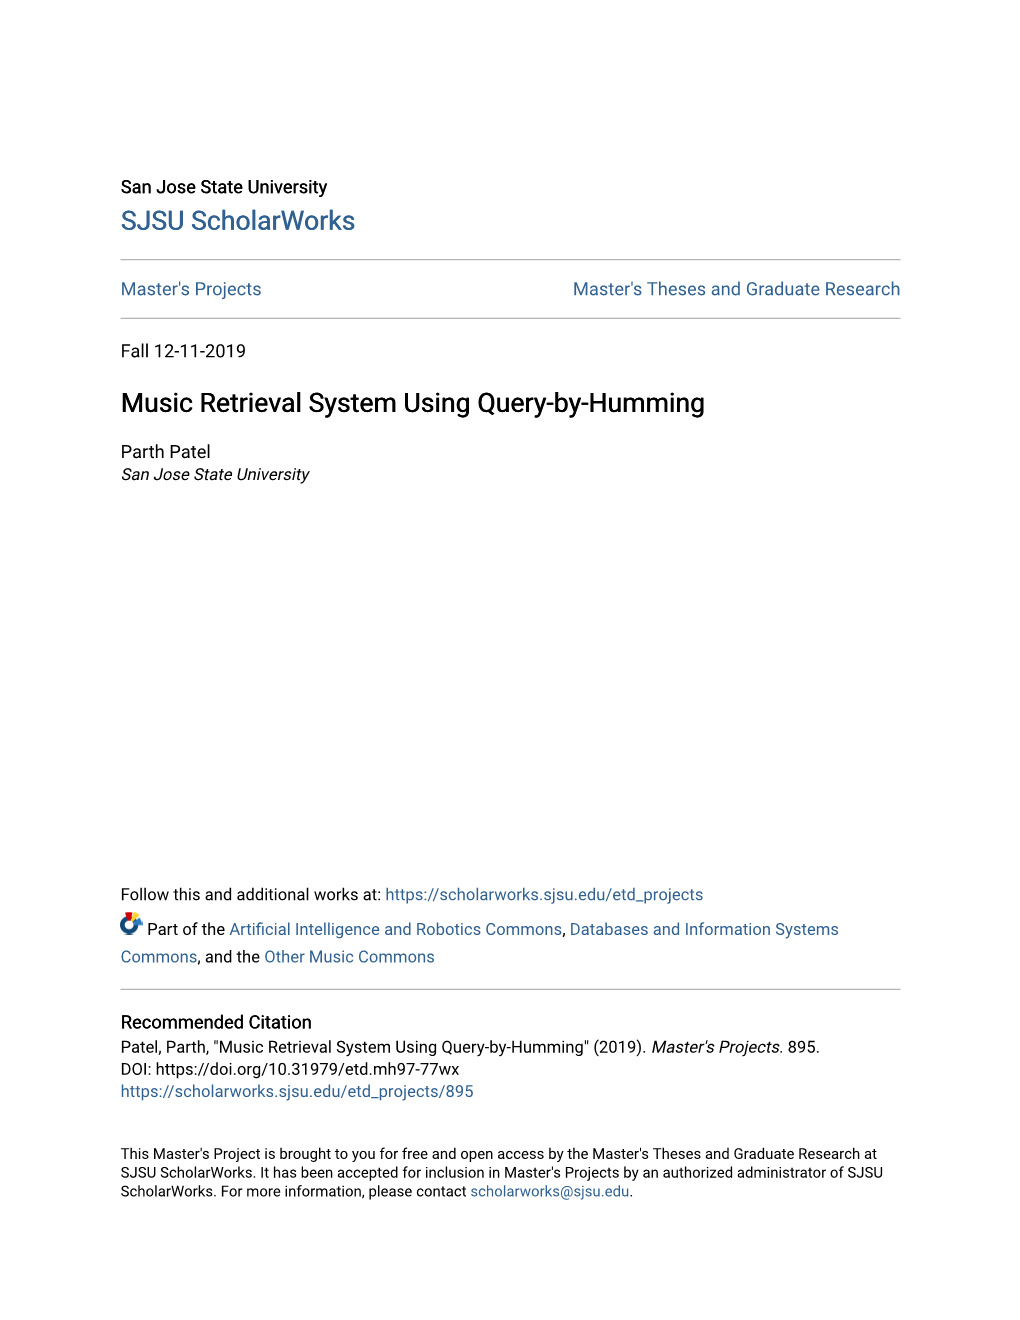 Music Retrieval System Using Query-By-Humming